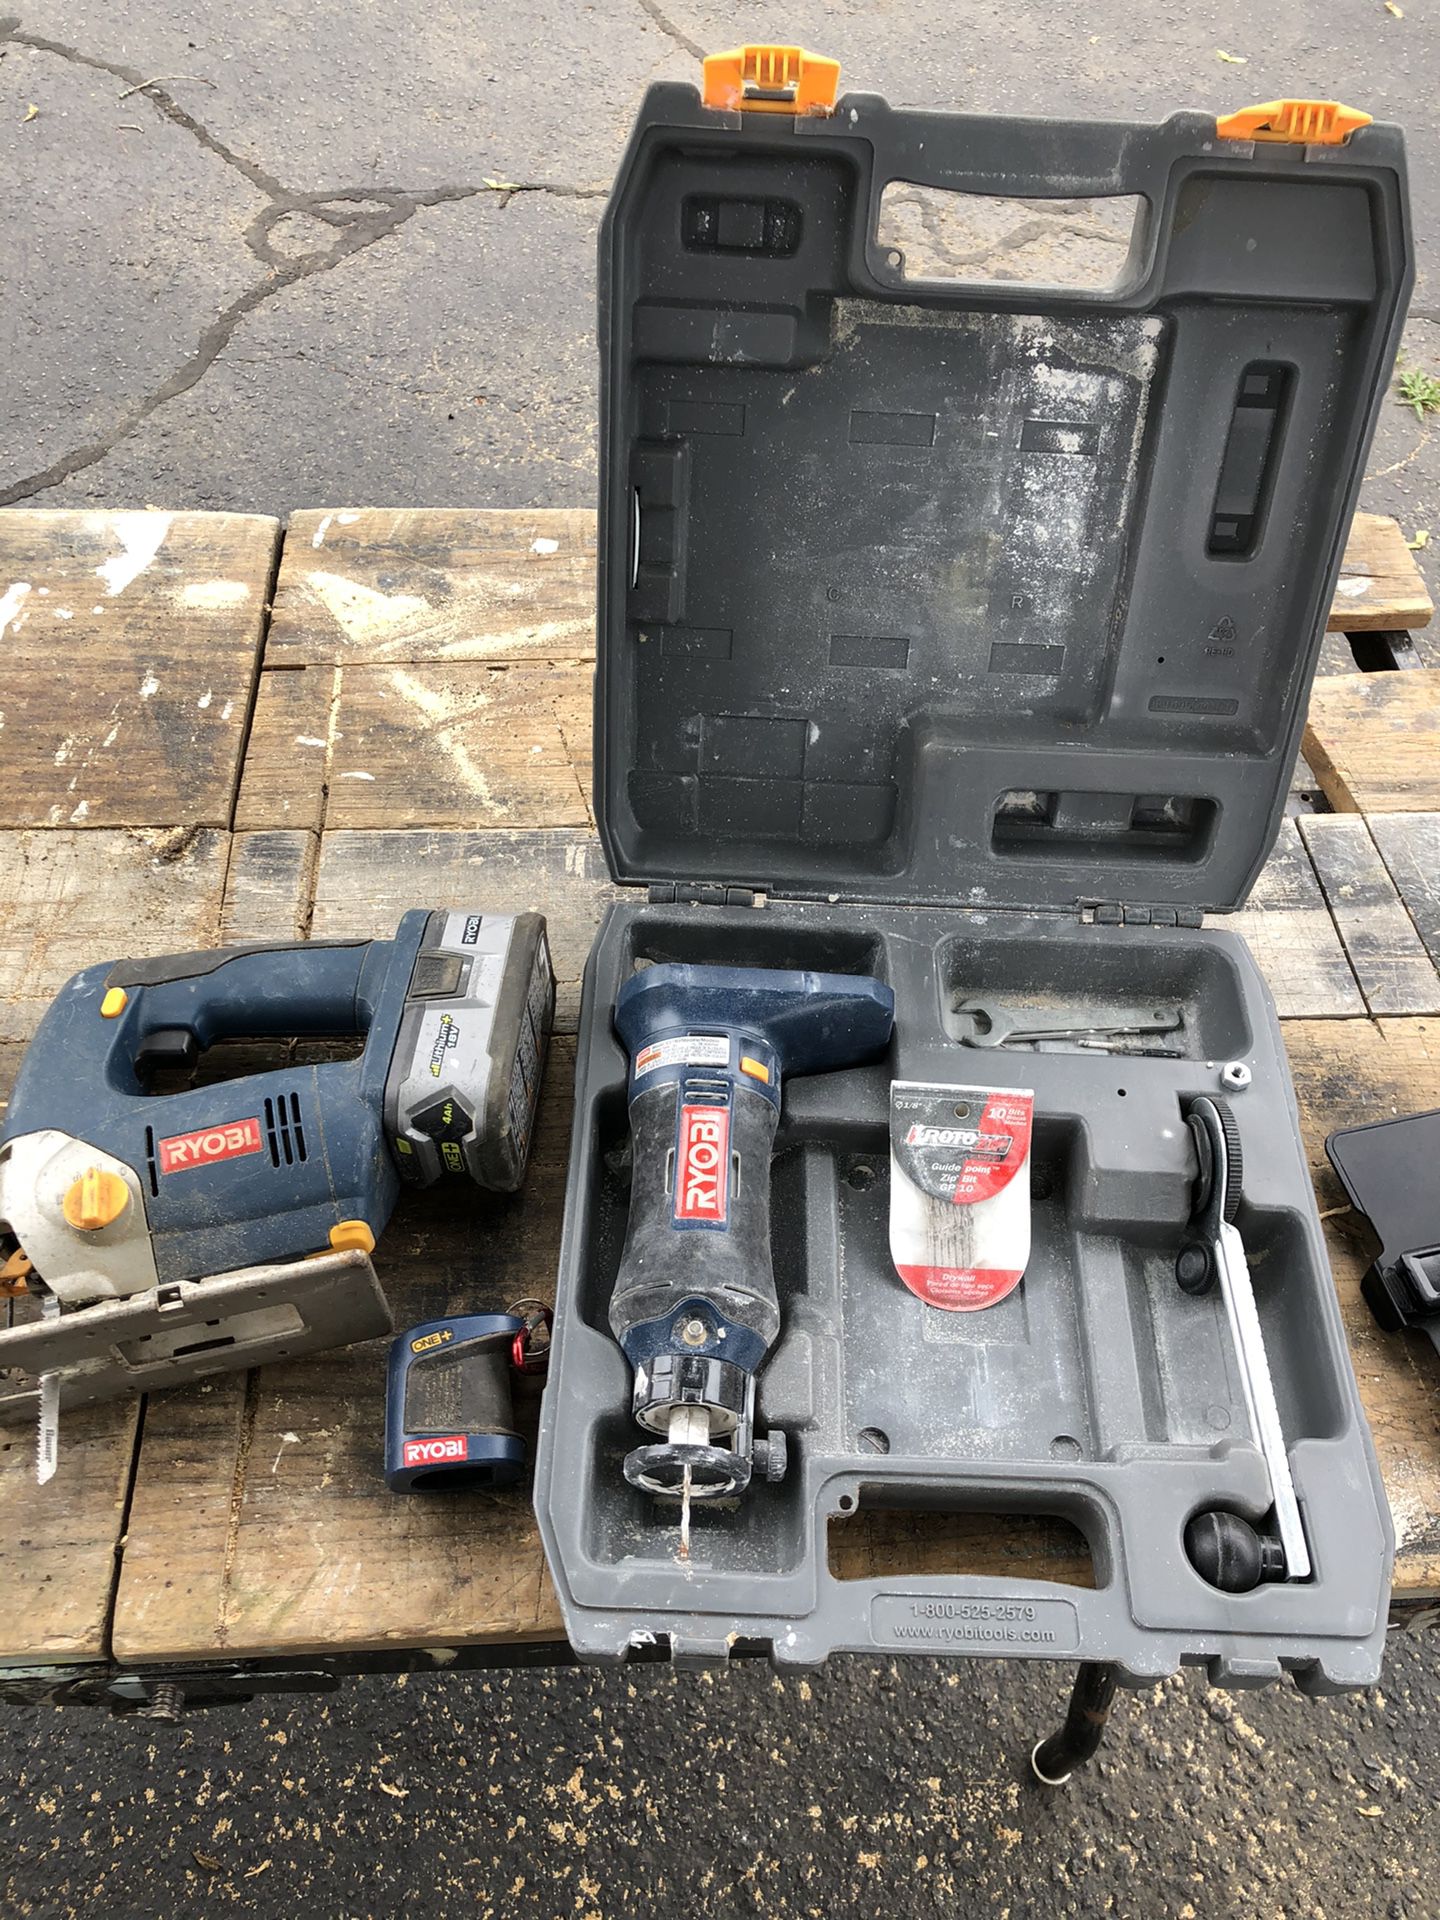 Ryobi jid saw and Sheetrock router with a battery